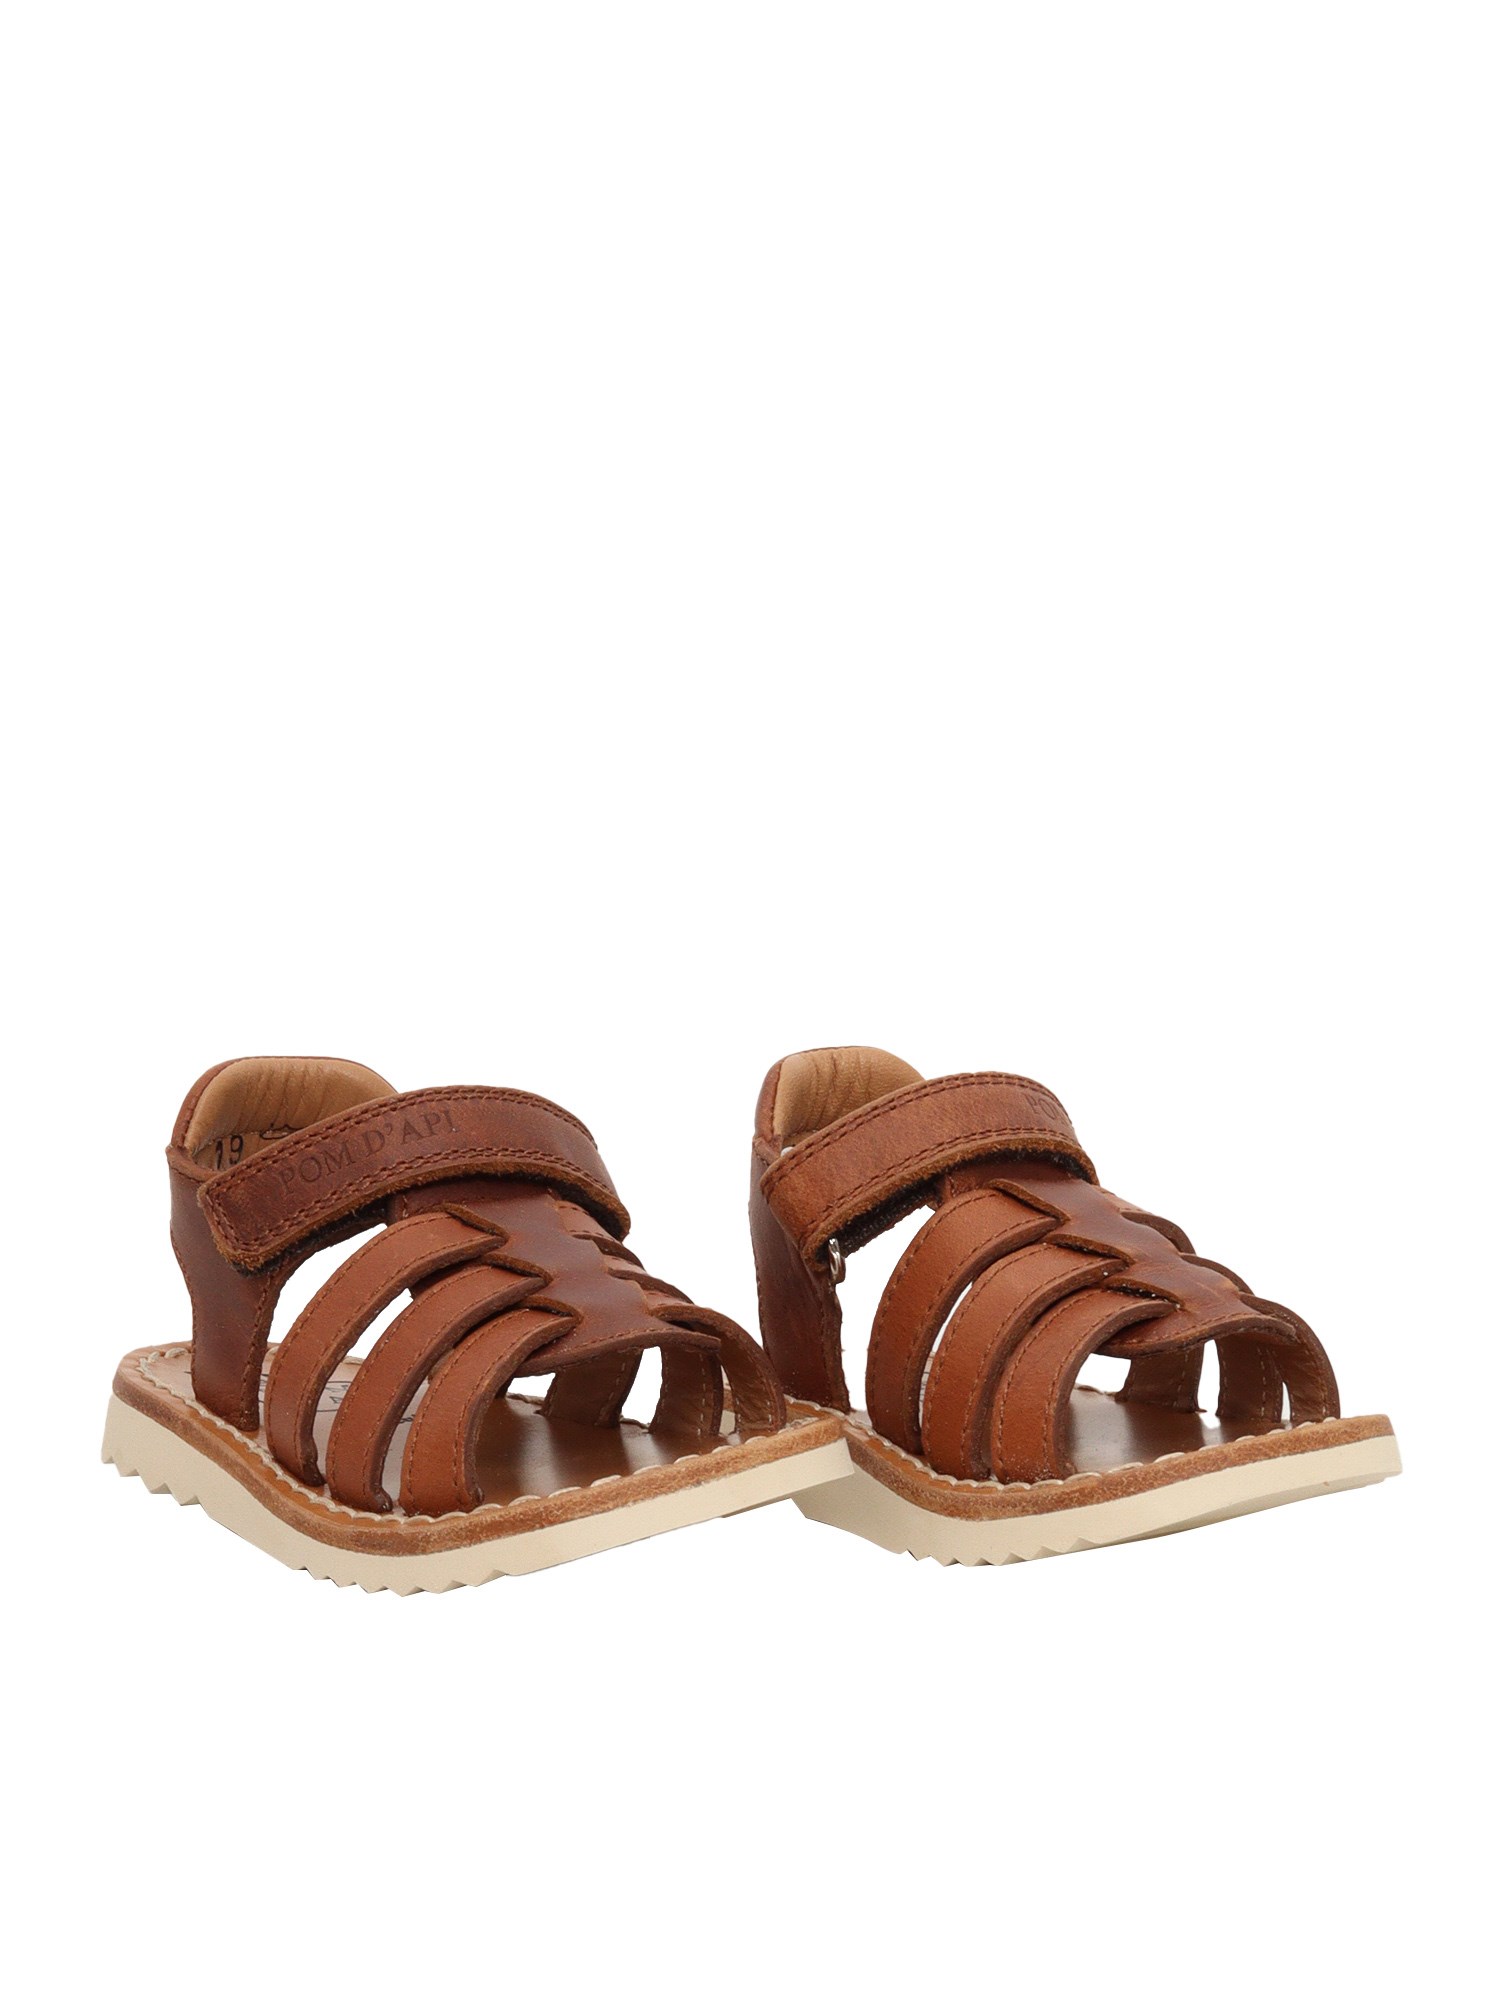 Pom D'api Leather Spider Sandals. In Brown